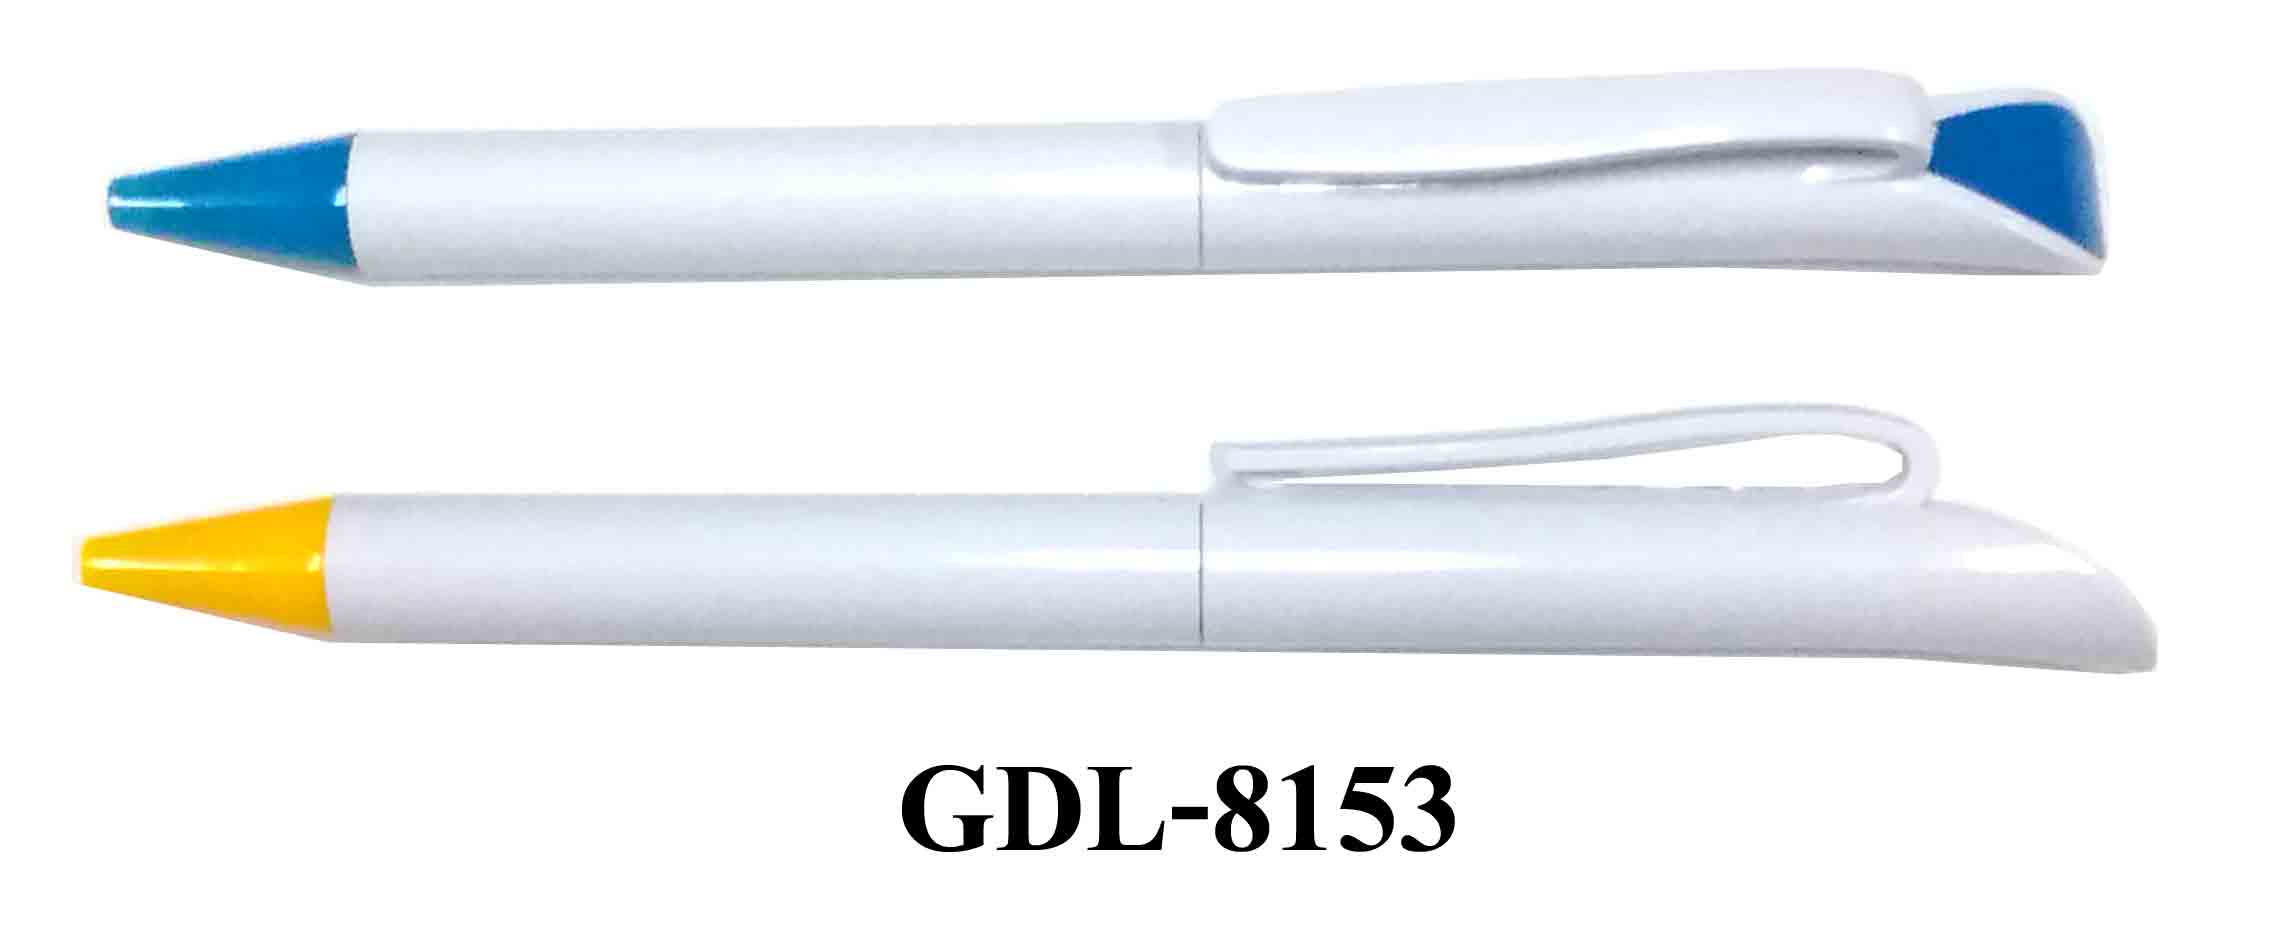 GDL-8153 